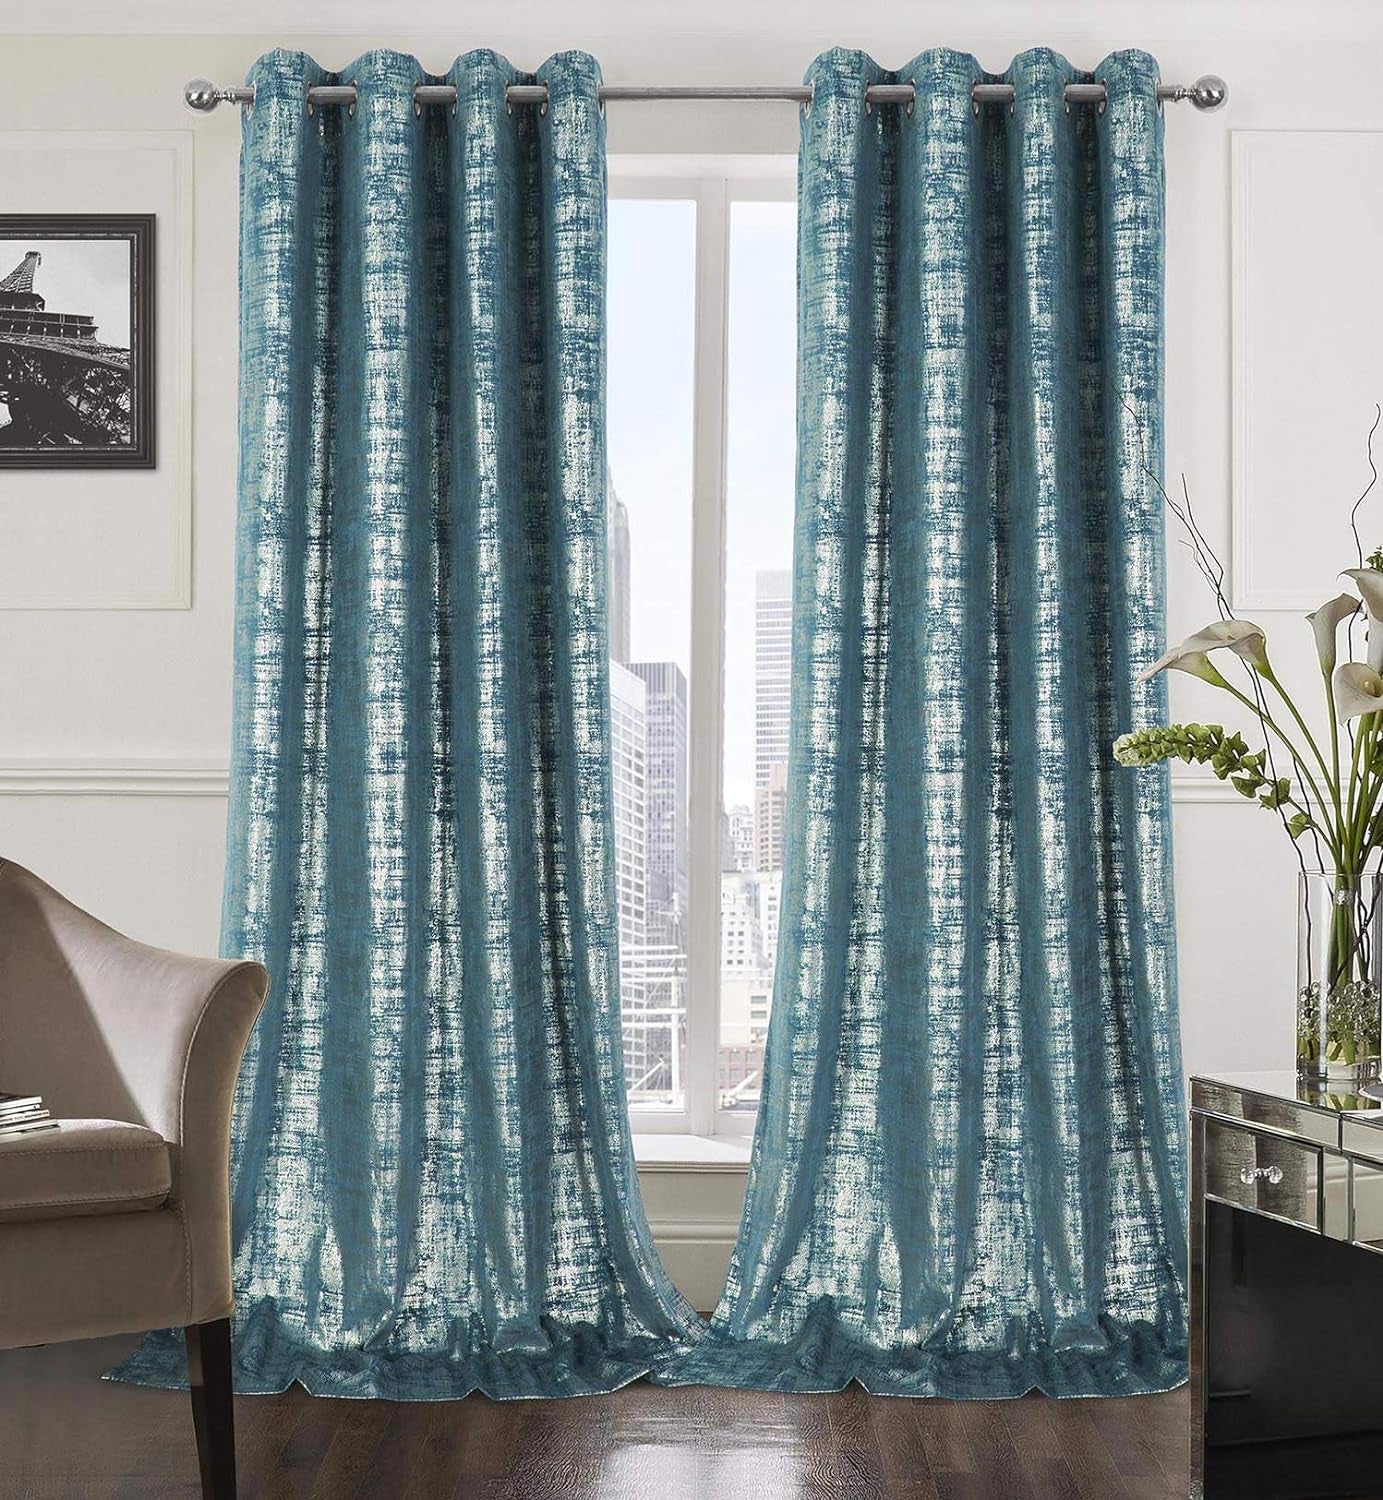 Always4U Soft Velvet Curtains 95 Inch Length Luxury Bedroom Curtains Gold Foil Print Window Curtains for Living Room 1 Panel White  always4u Teal (Silver Print) 2 Panels: 52''W*108''L 